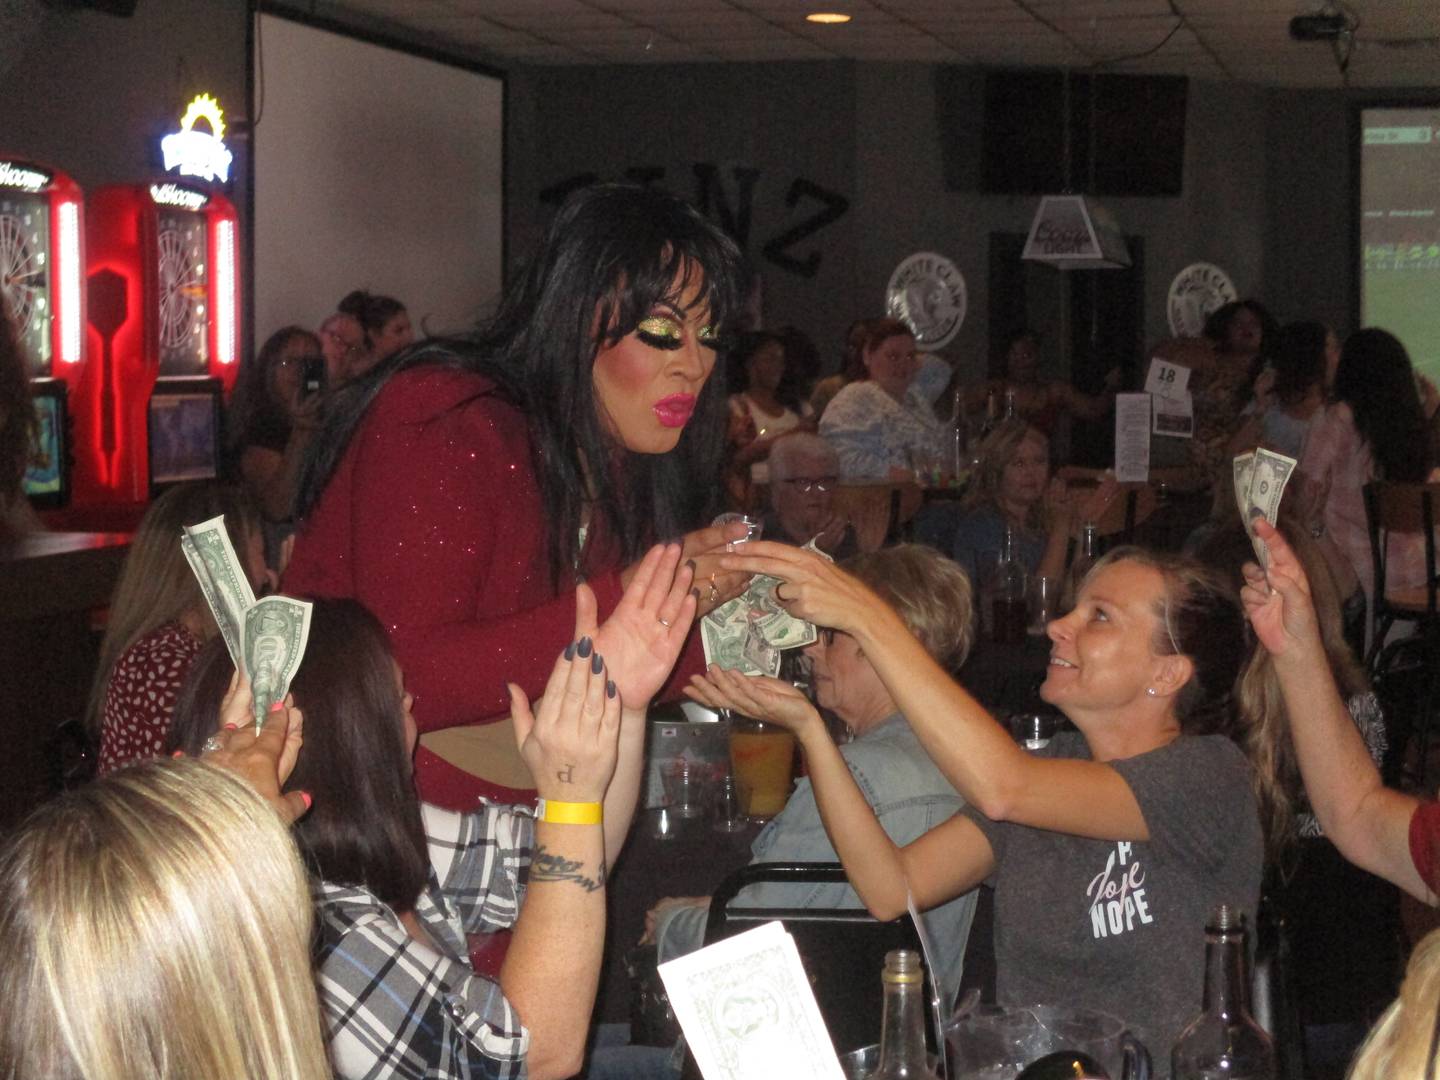 Clients eagerly give advice to drag performer Aleyna Couture during the "Brunch Flirty Funday" at the Pinz Entertainment Center in Yorkville on August 21, 2022.